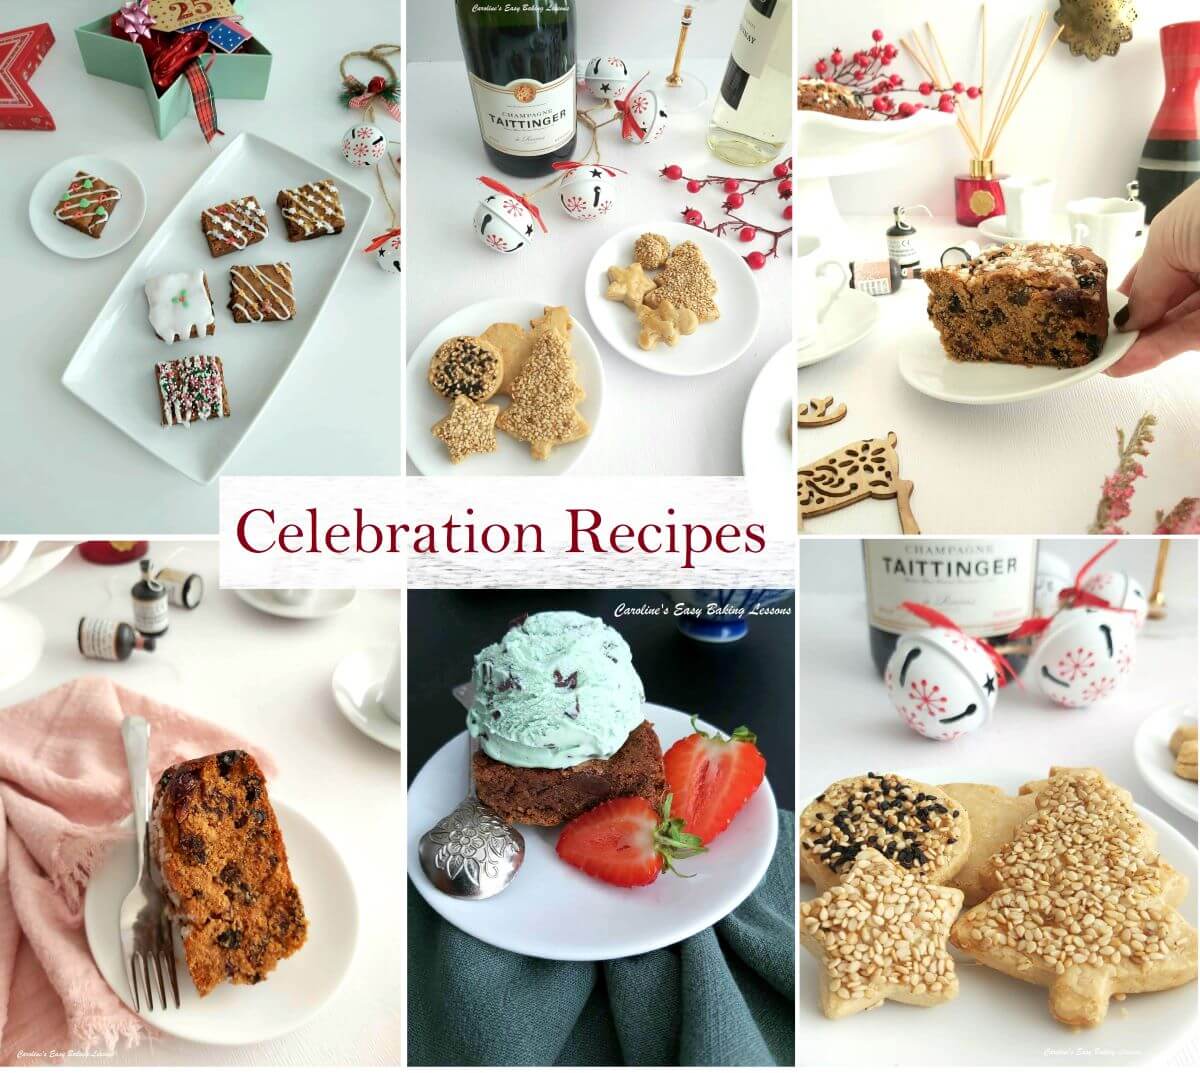 9 photo collage of celebration and party foods with title celebration recipes.